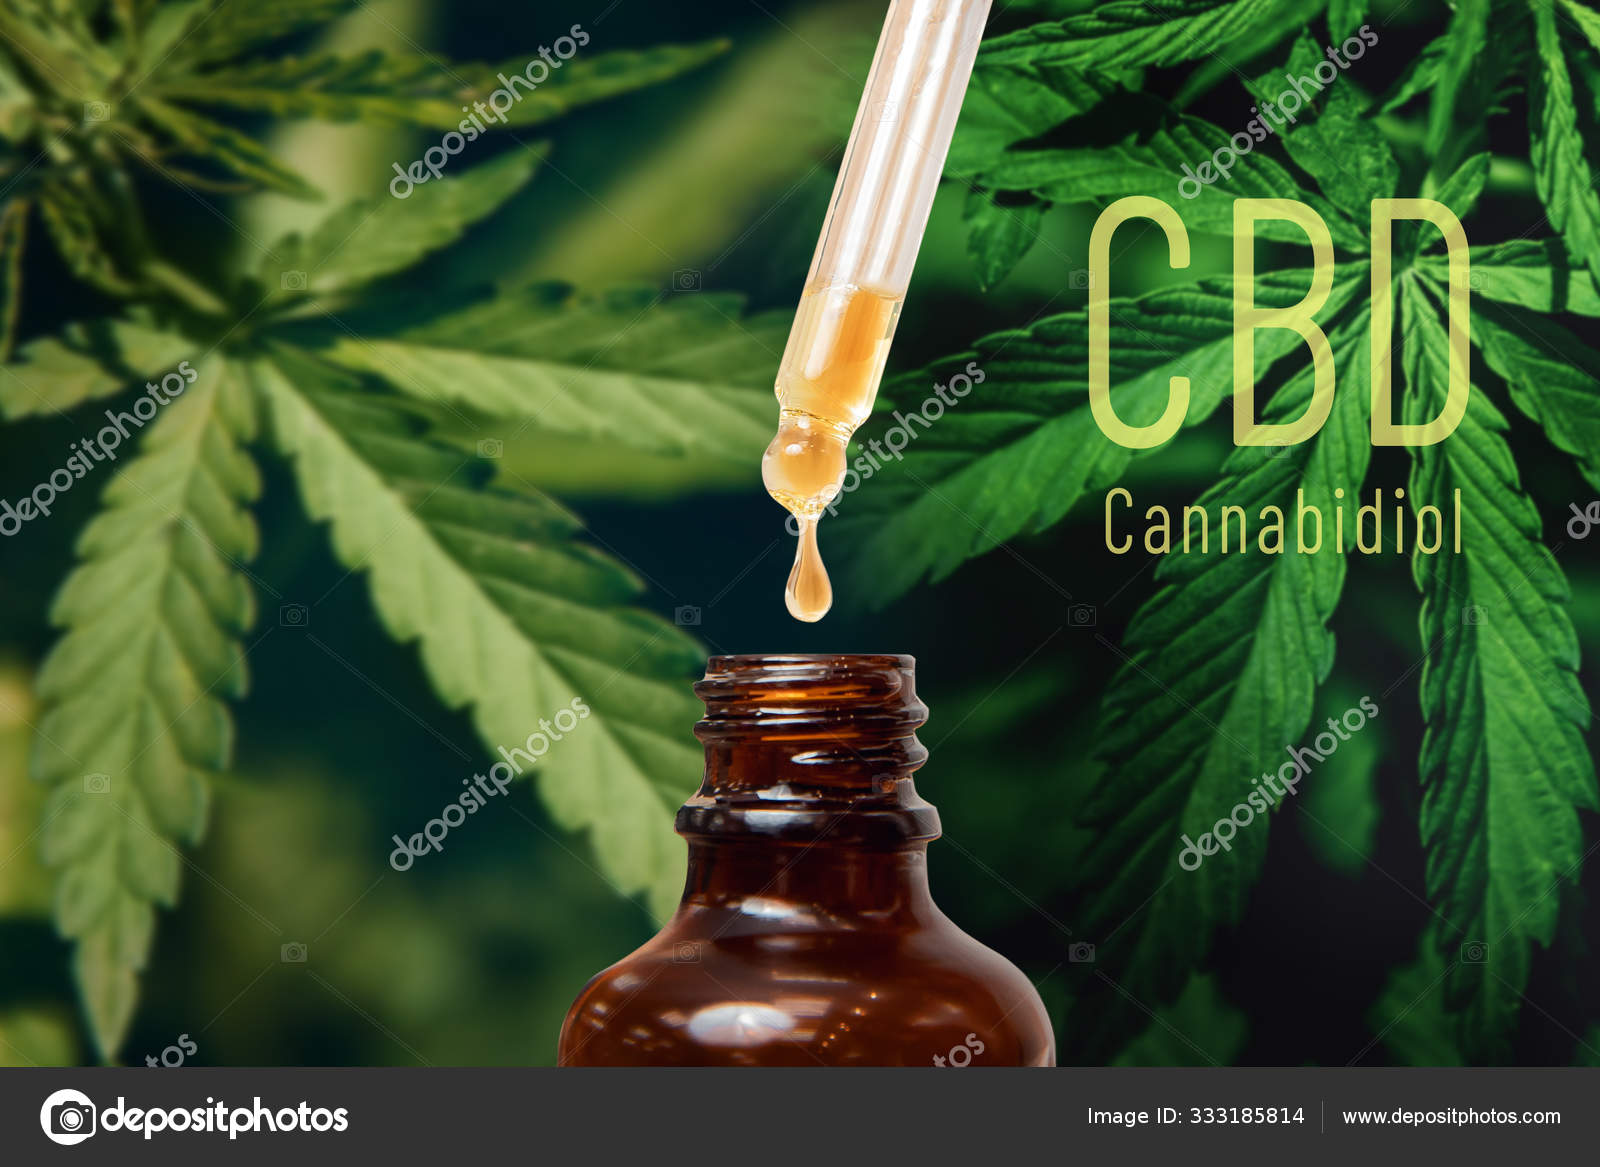 Homemade CBD-Rich Herbal Oil :: For Topical Use Only - Frugally Sustainable